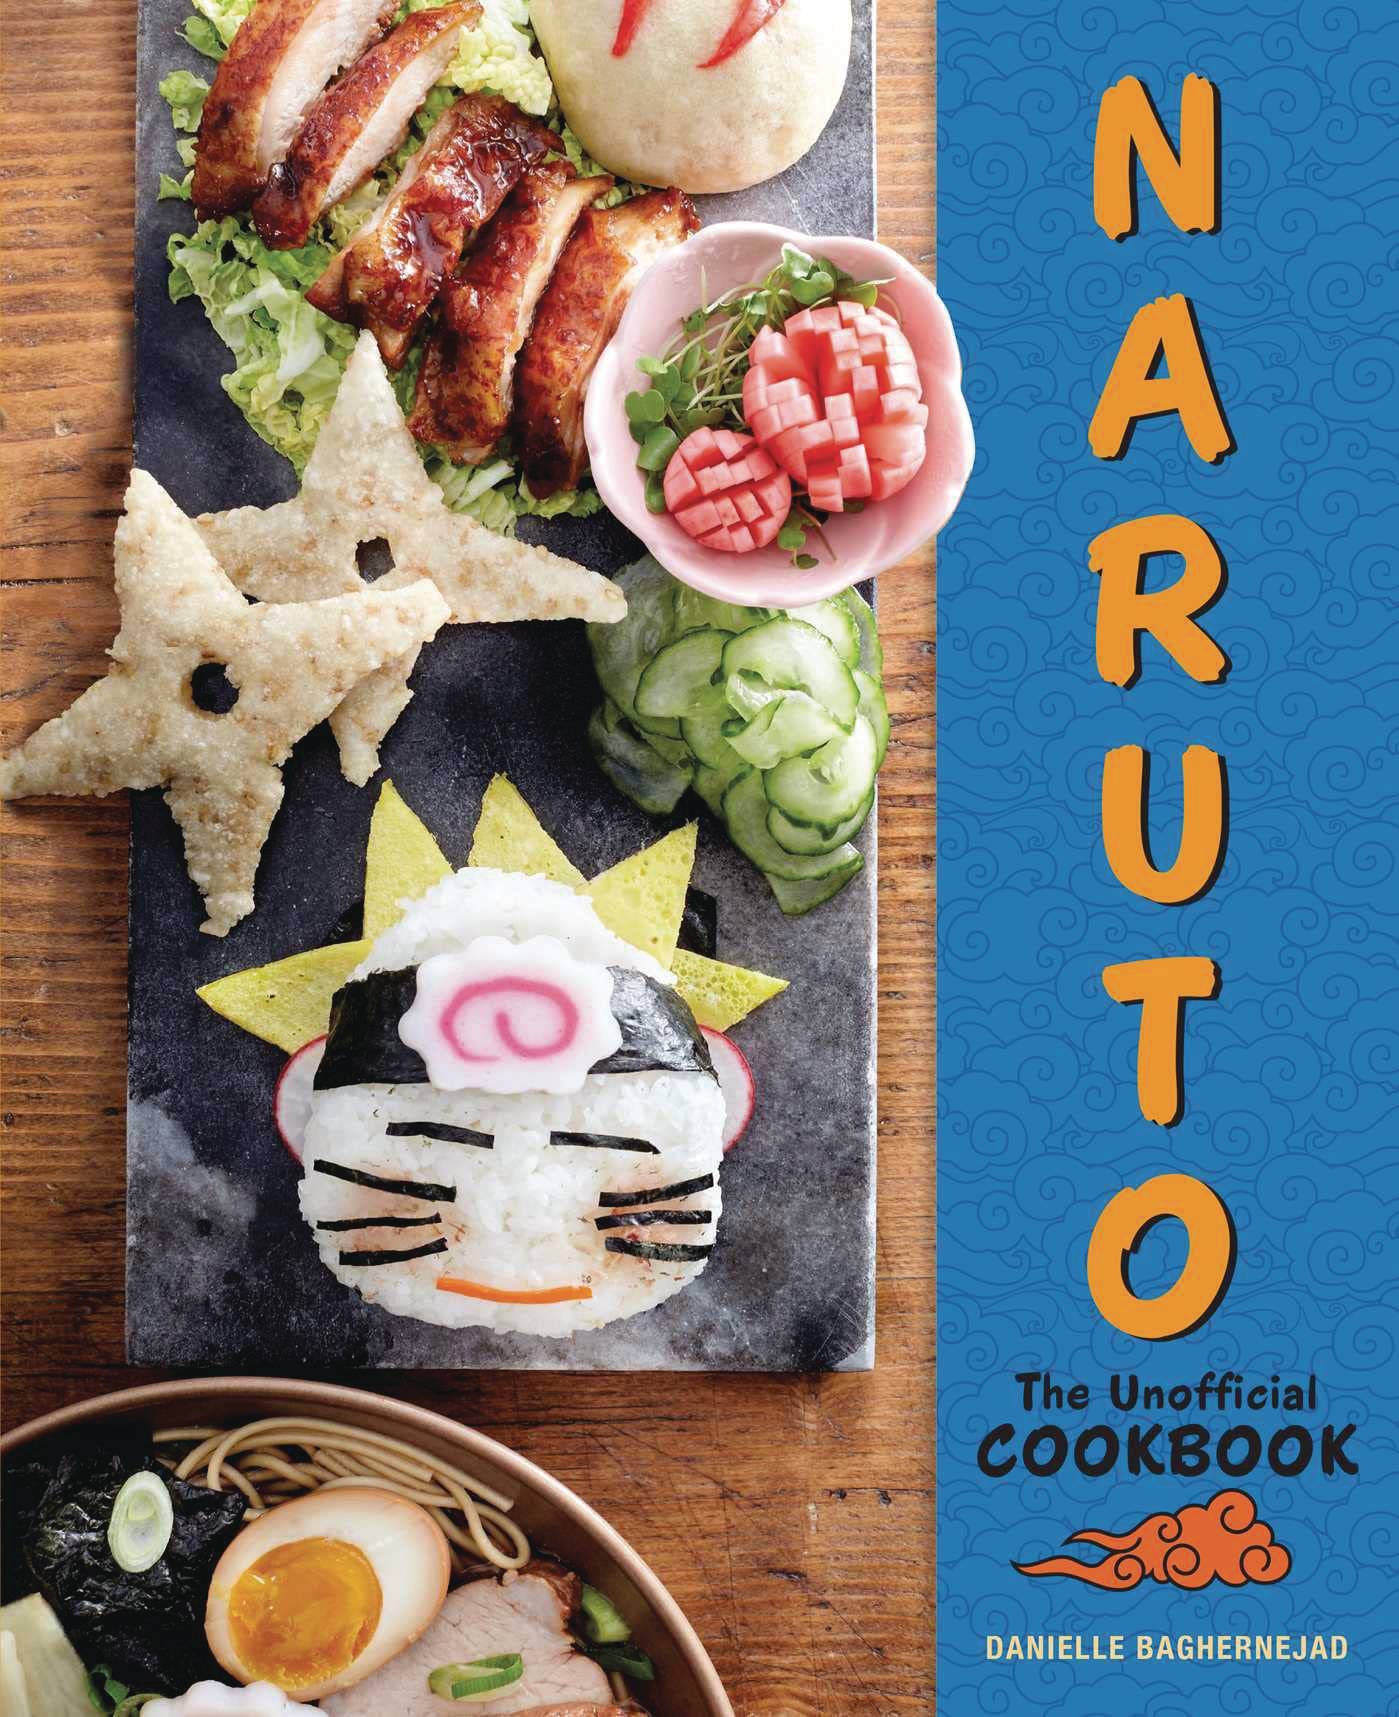 The One Stop Shop Comics & Games Naruto Unoff Cookbook Hc (C: 0-1-0) (01/04/2023) INSIGHT EDITIONS